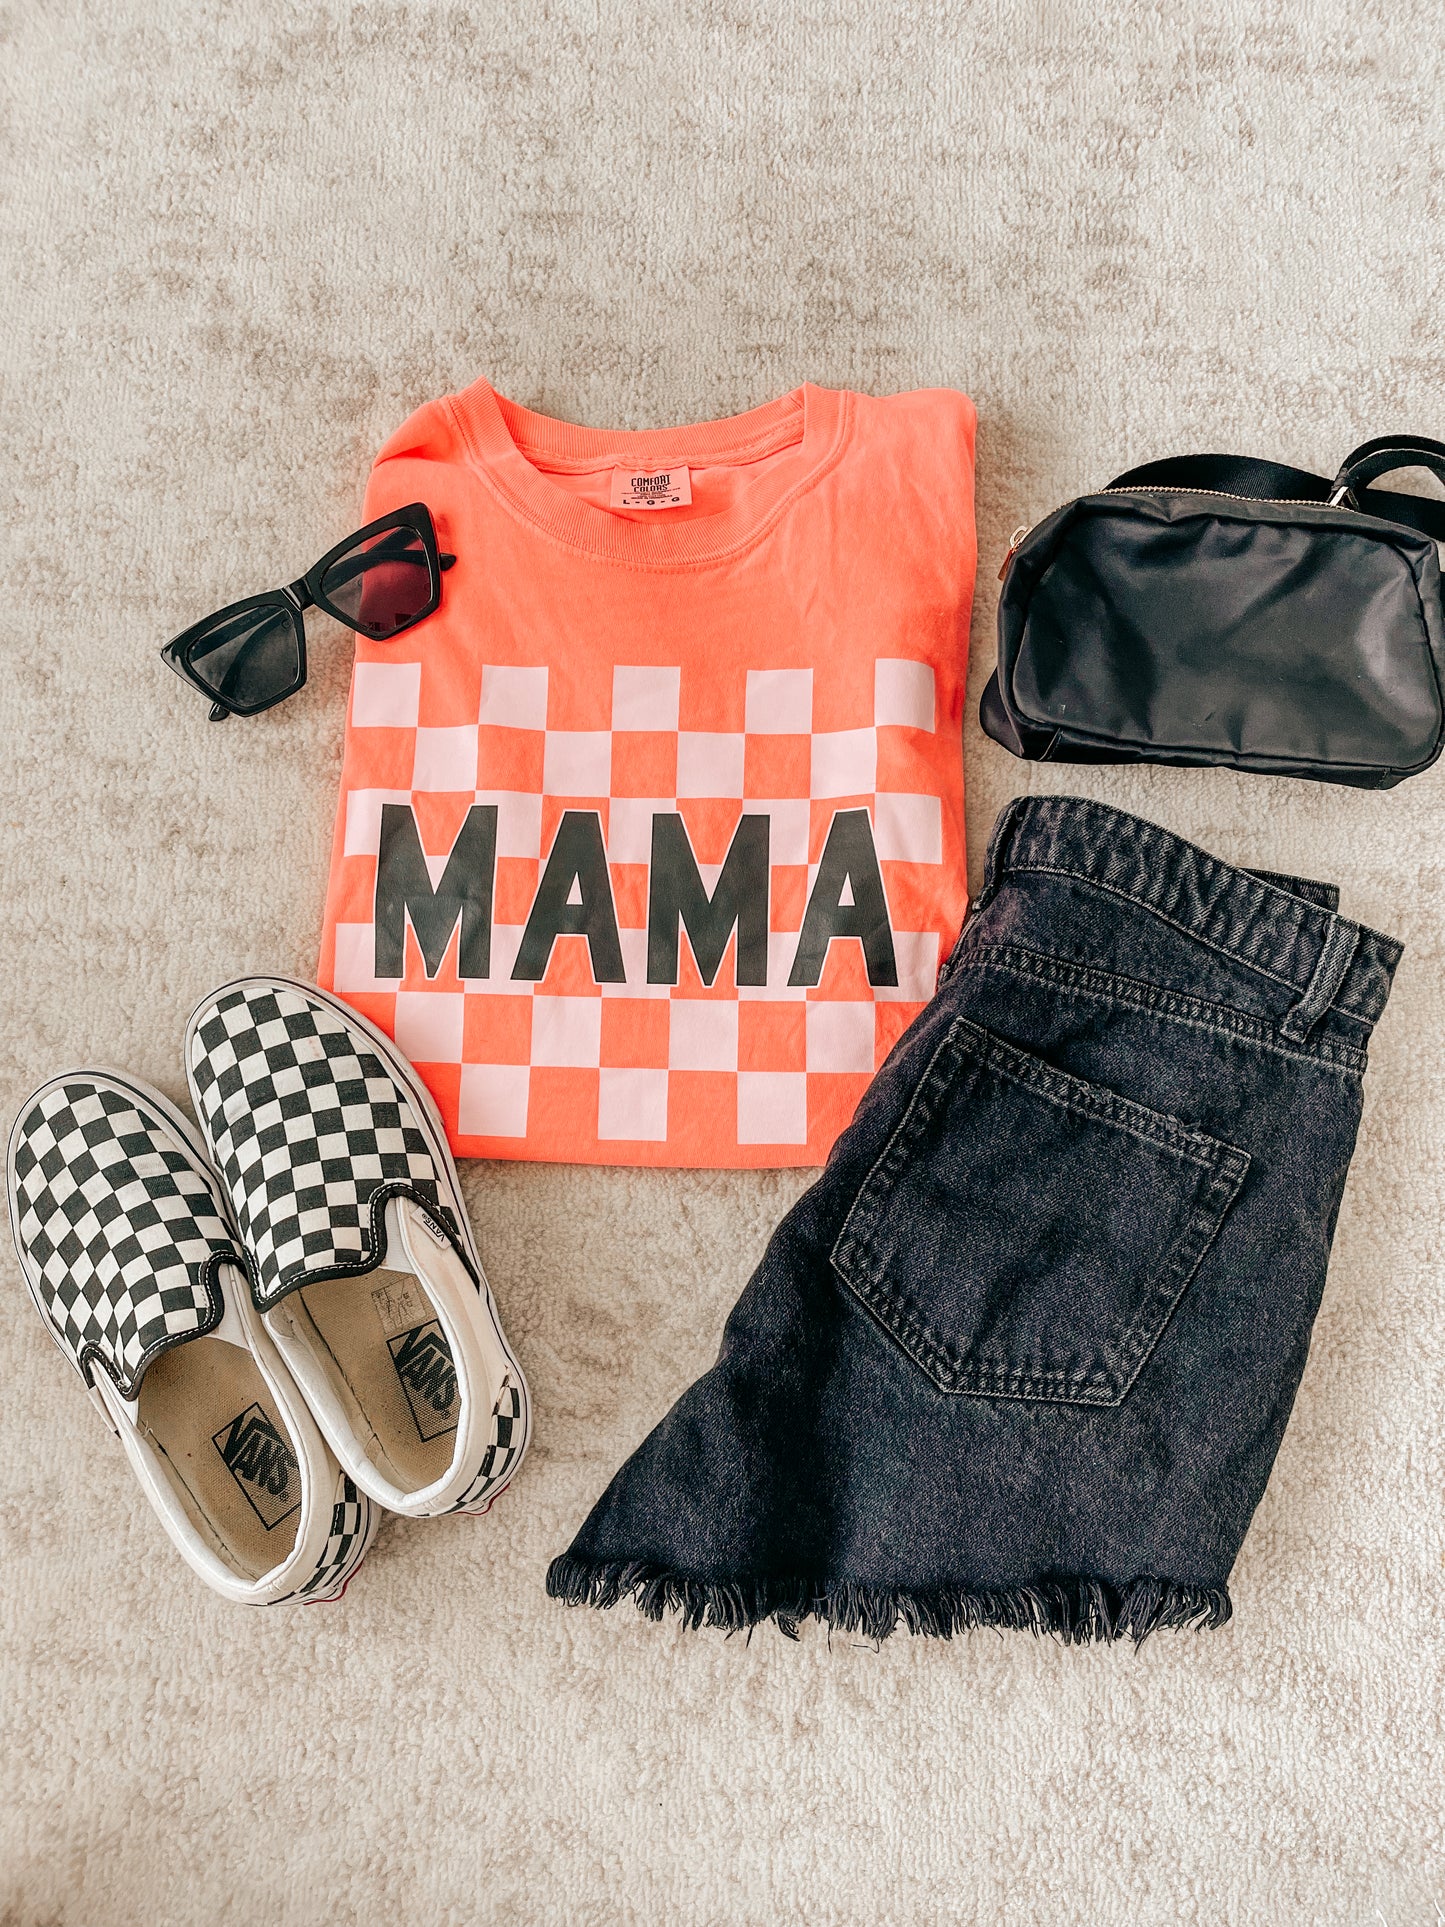 Mama Checkered (Neon, Across Front) - Tee (Neon Coral)